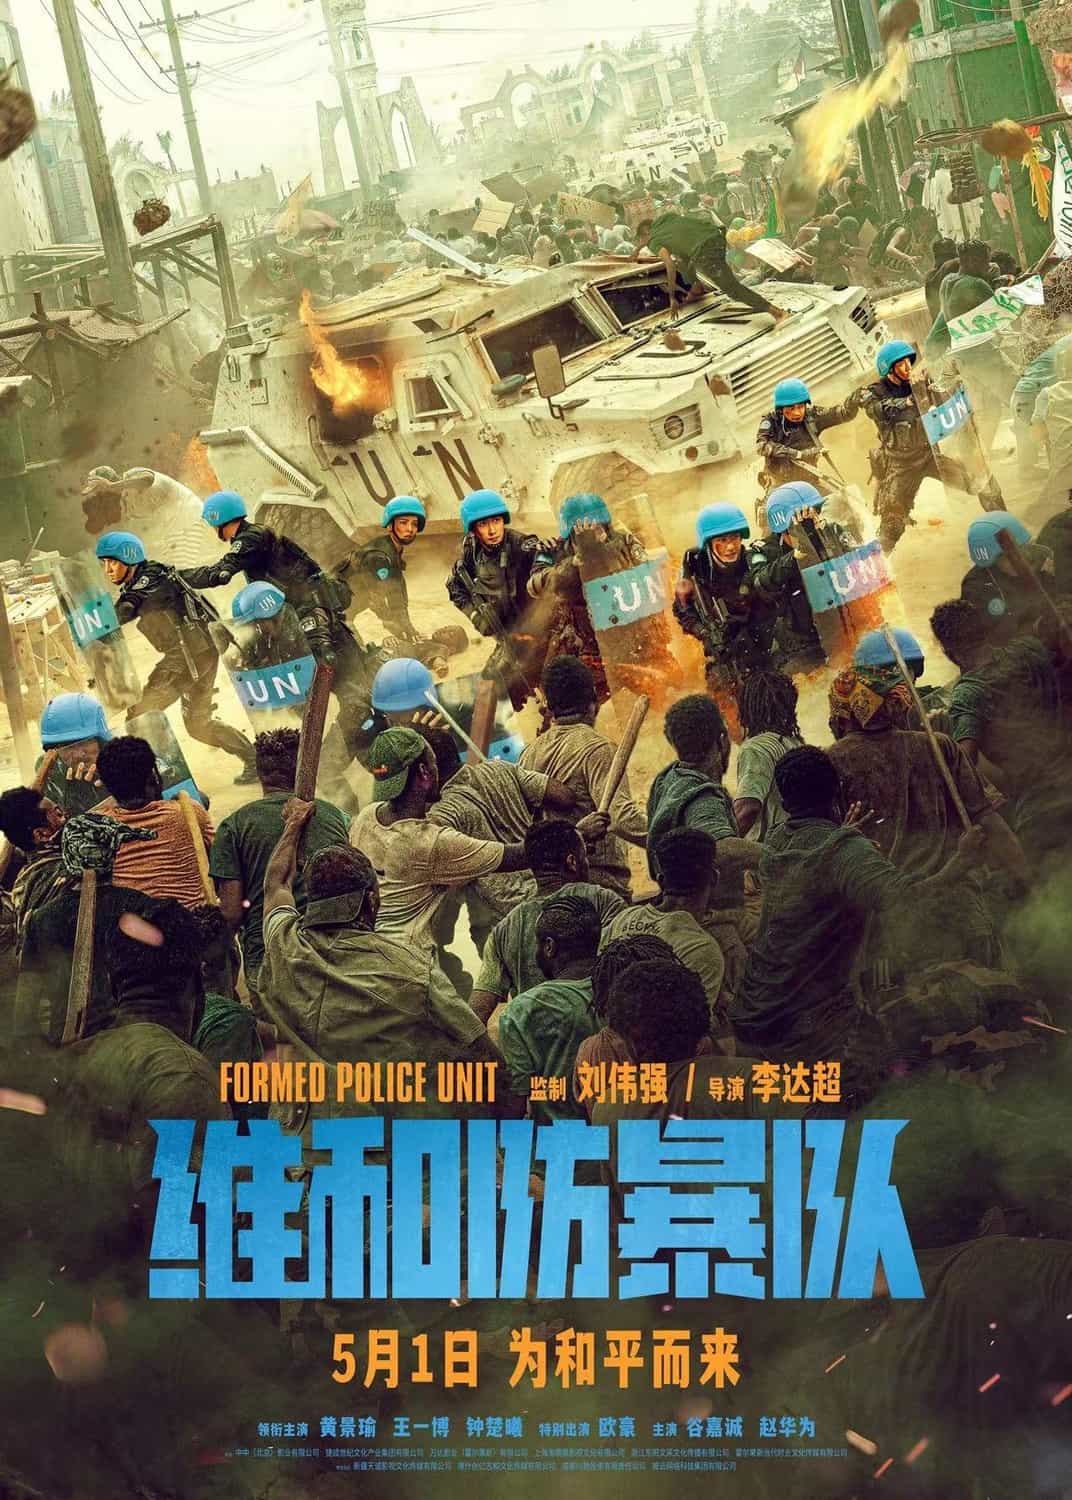 Global Box Office Weekend Report 3rd - 5th May 2024:  Formed Police Unit is the top global movie this weekend making its debut with $55.6 Million